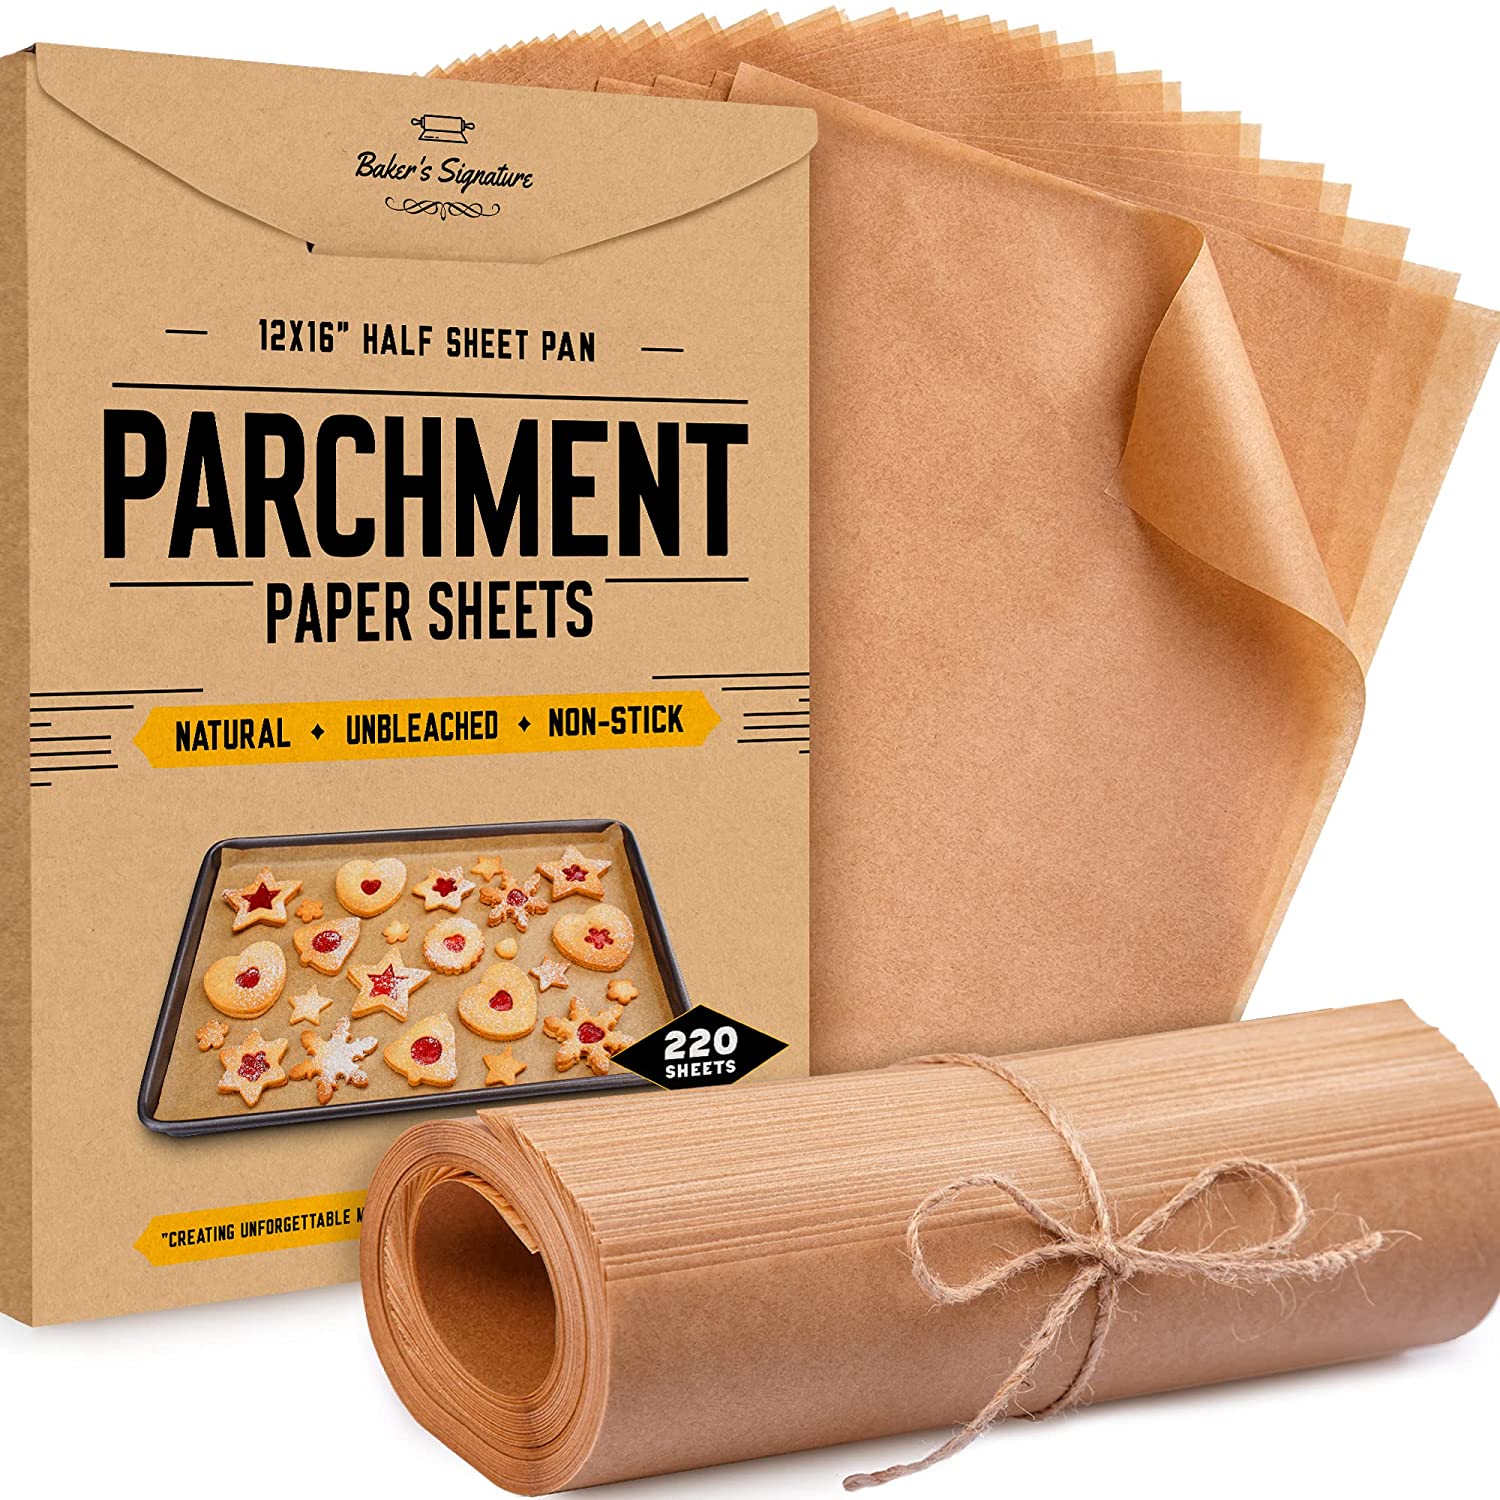 RFAQK's 100 pcs Parchment Papers (12 inches) - Baking Accessories